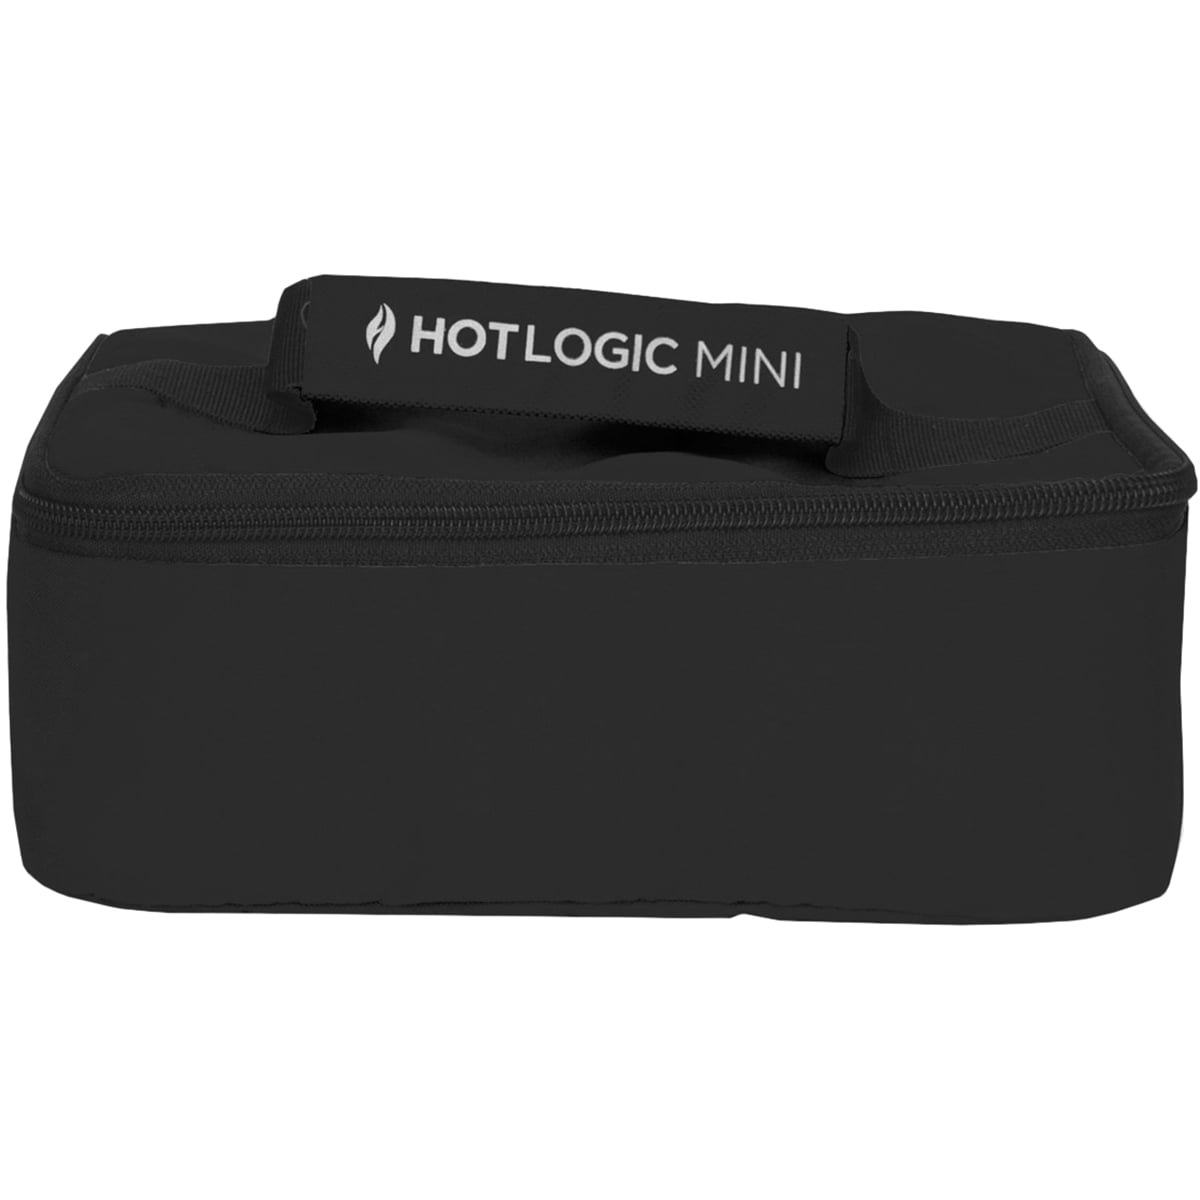 Hot Logic Mini – the oven that is ready when you are